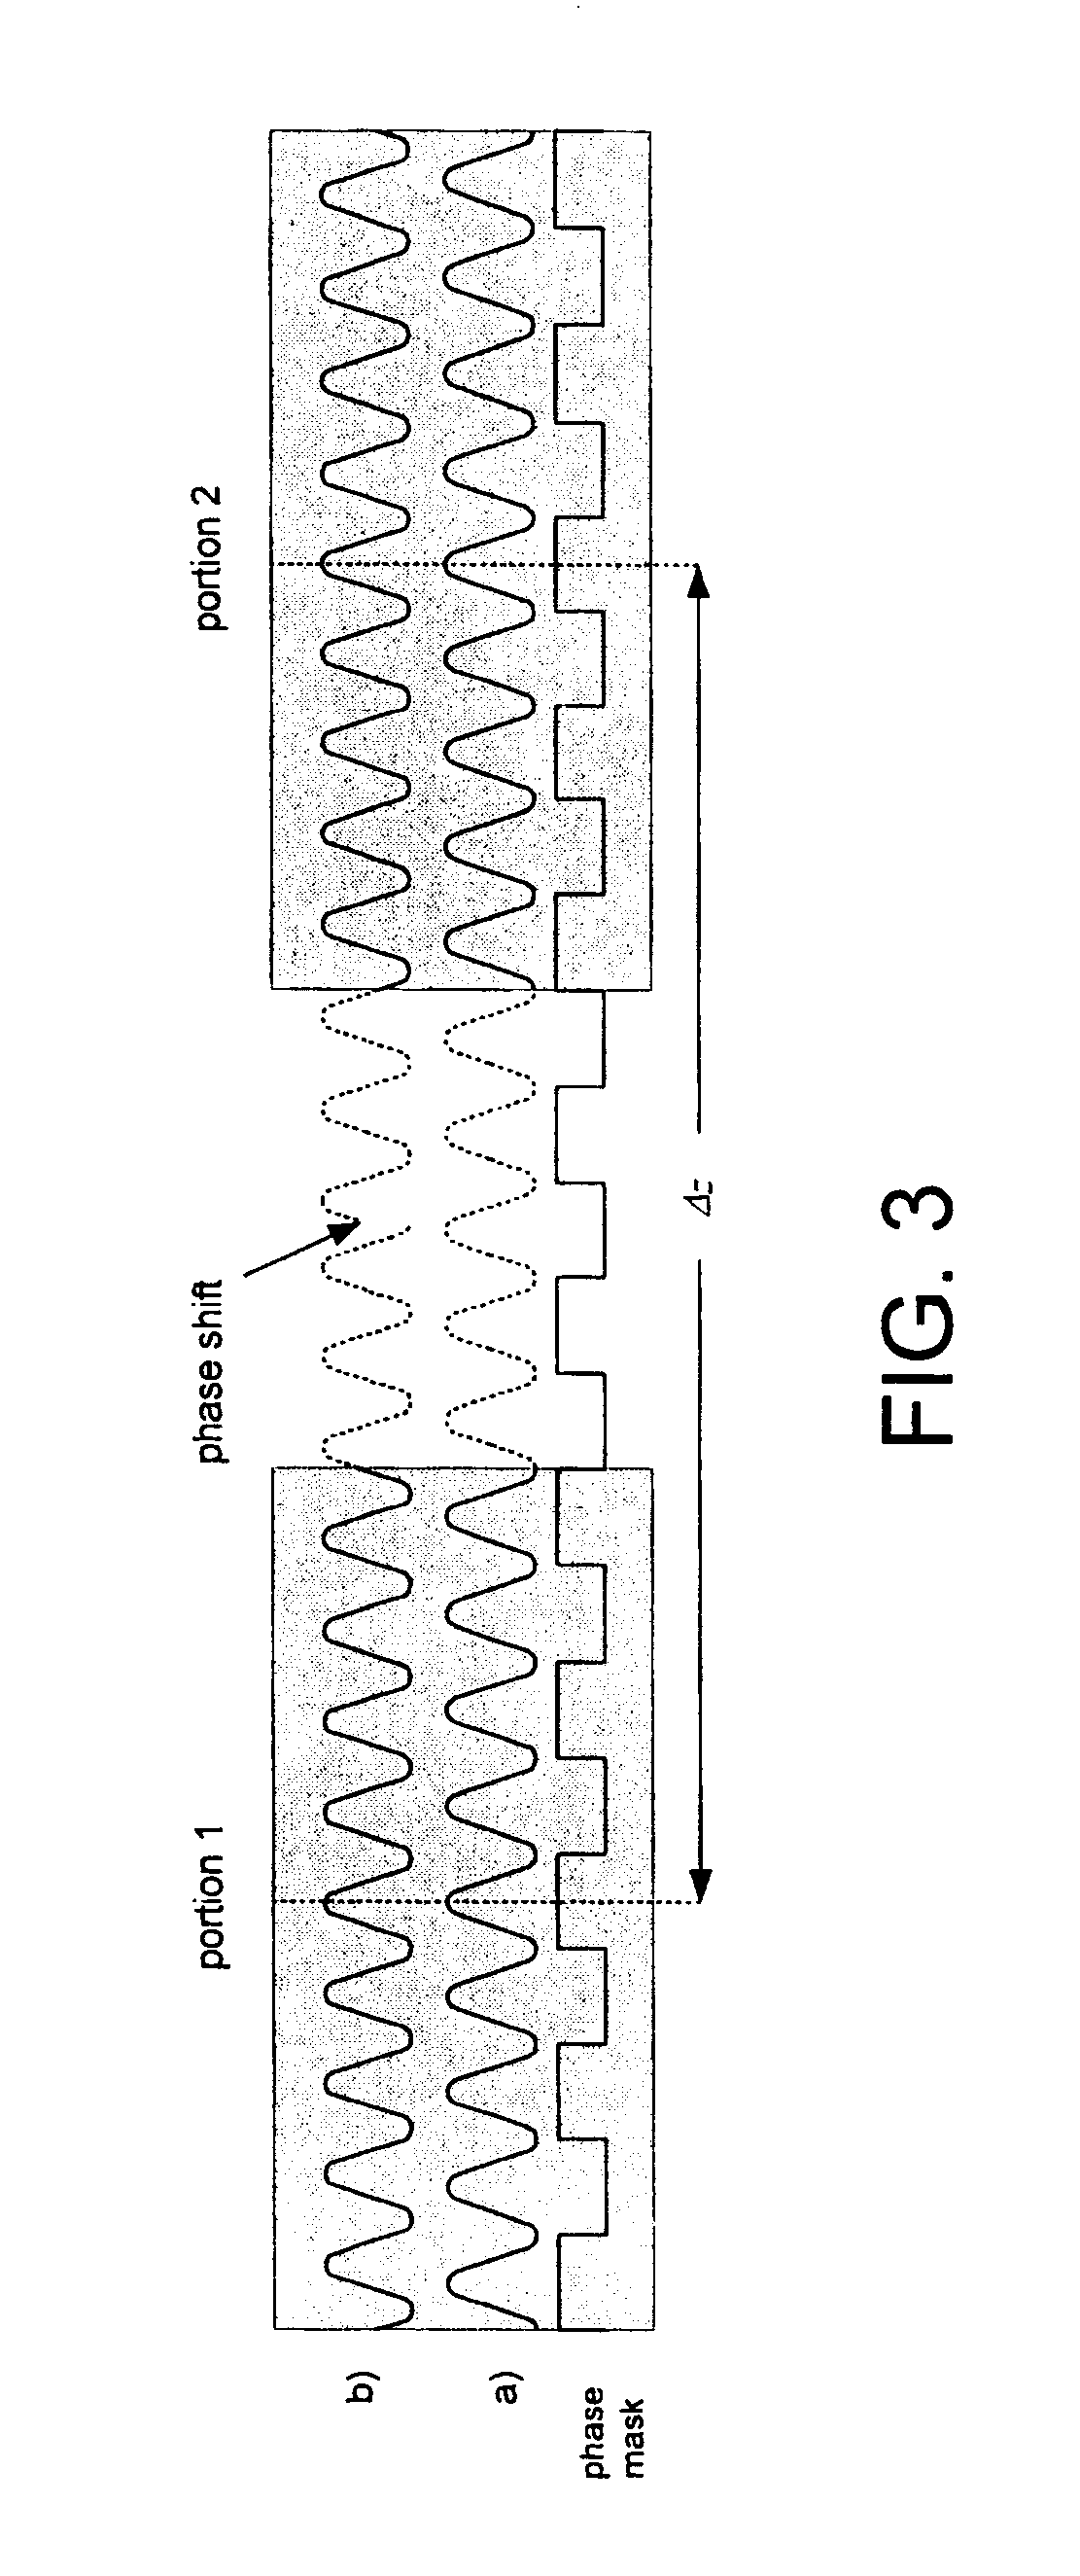 Method and apparatus for recording an optical grating in a photosensitive medium